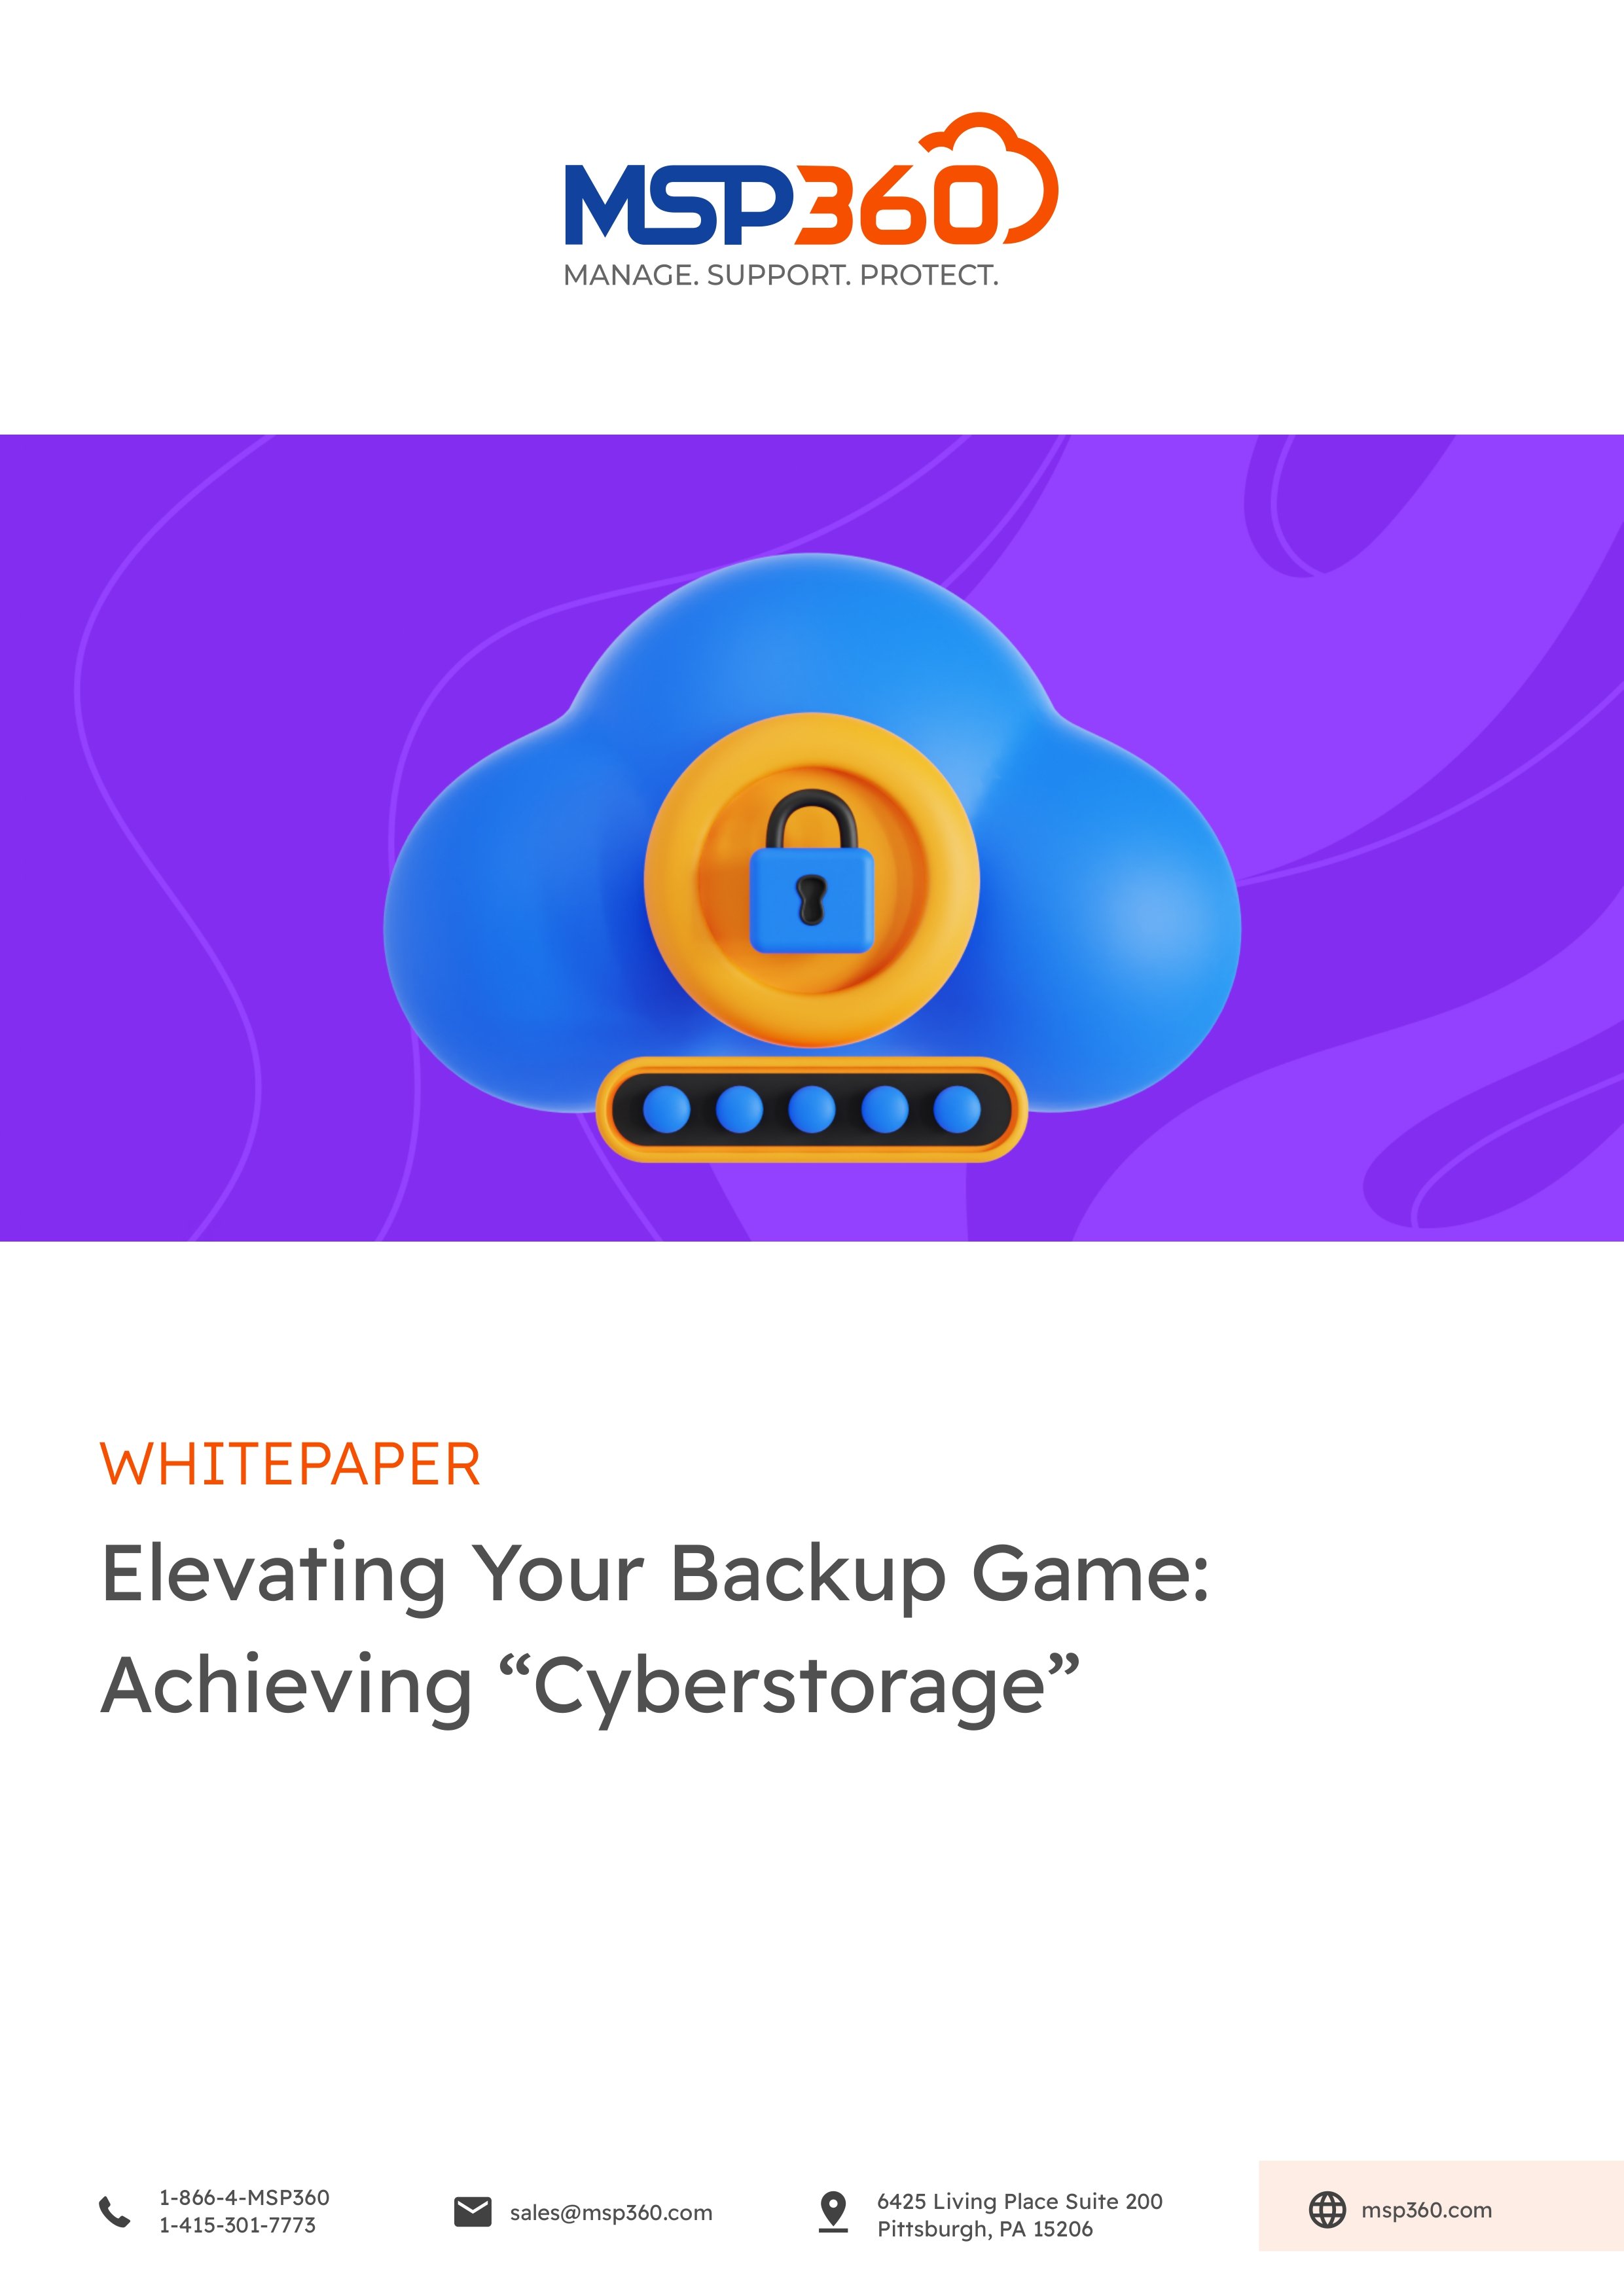 Elevating Your Backup Game: Achieving “Cyberstorage”